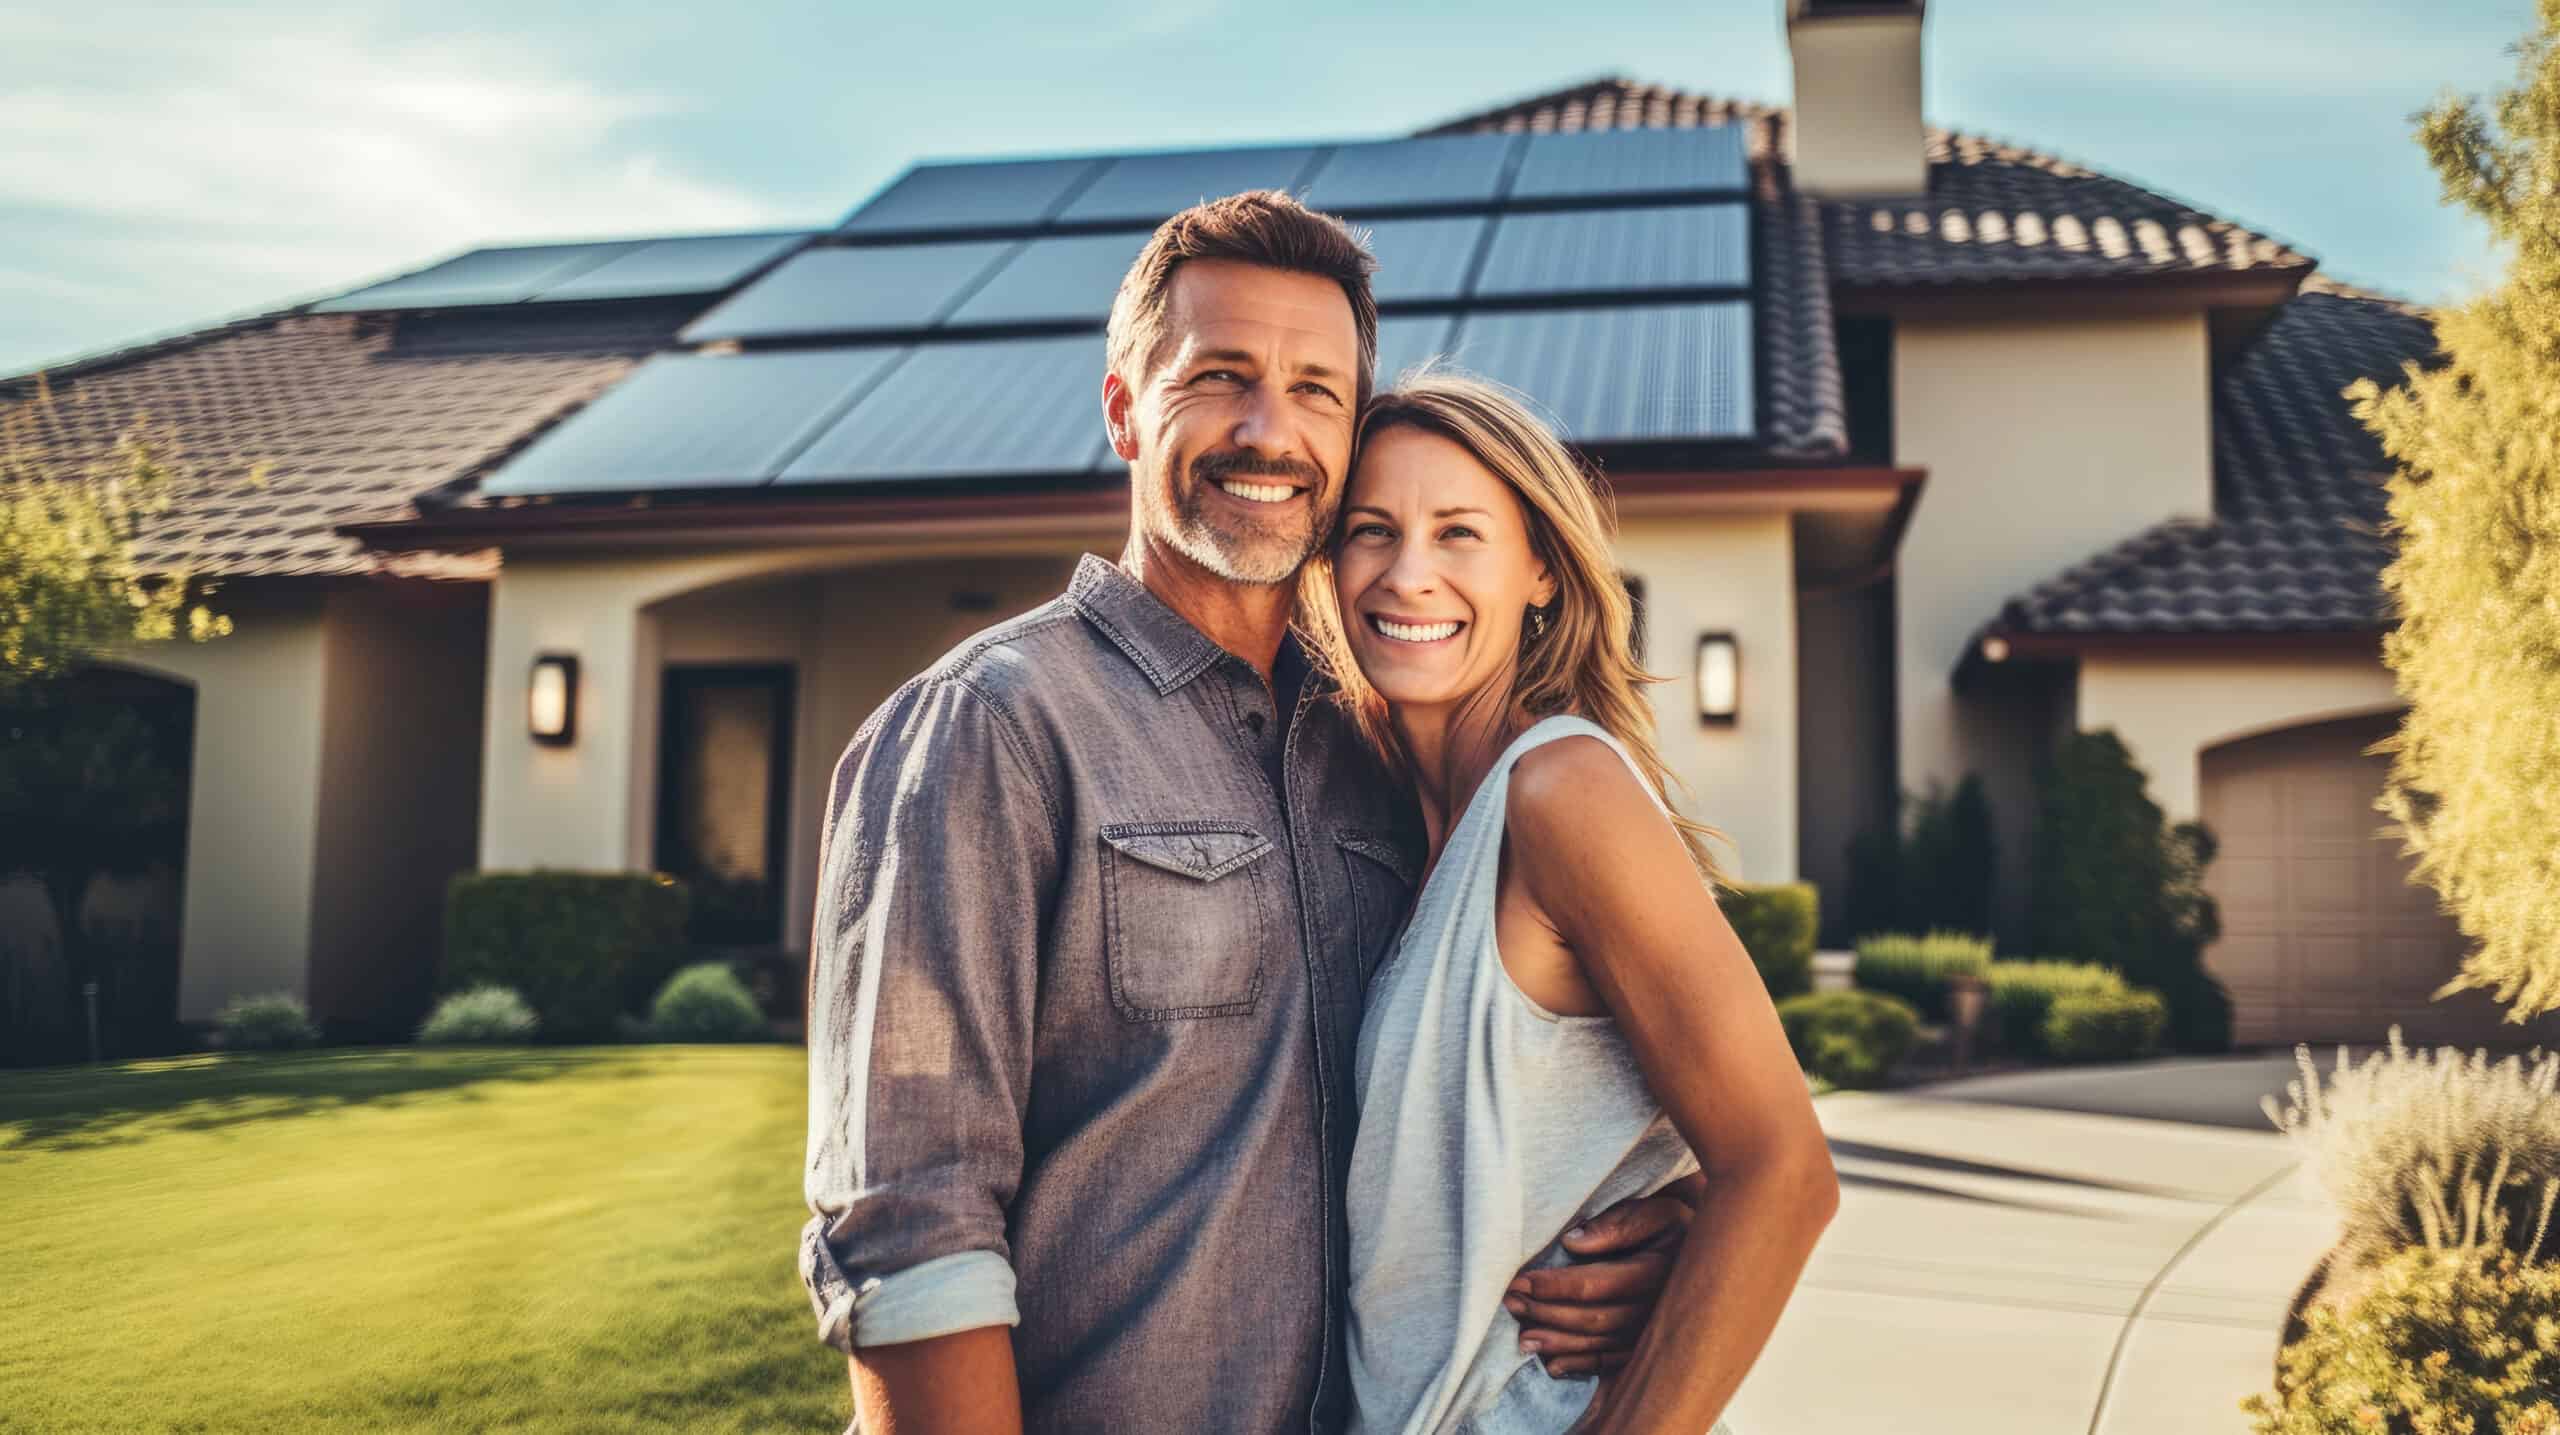 Couple making the solar journey together